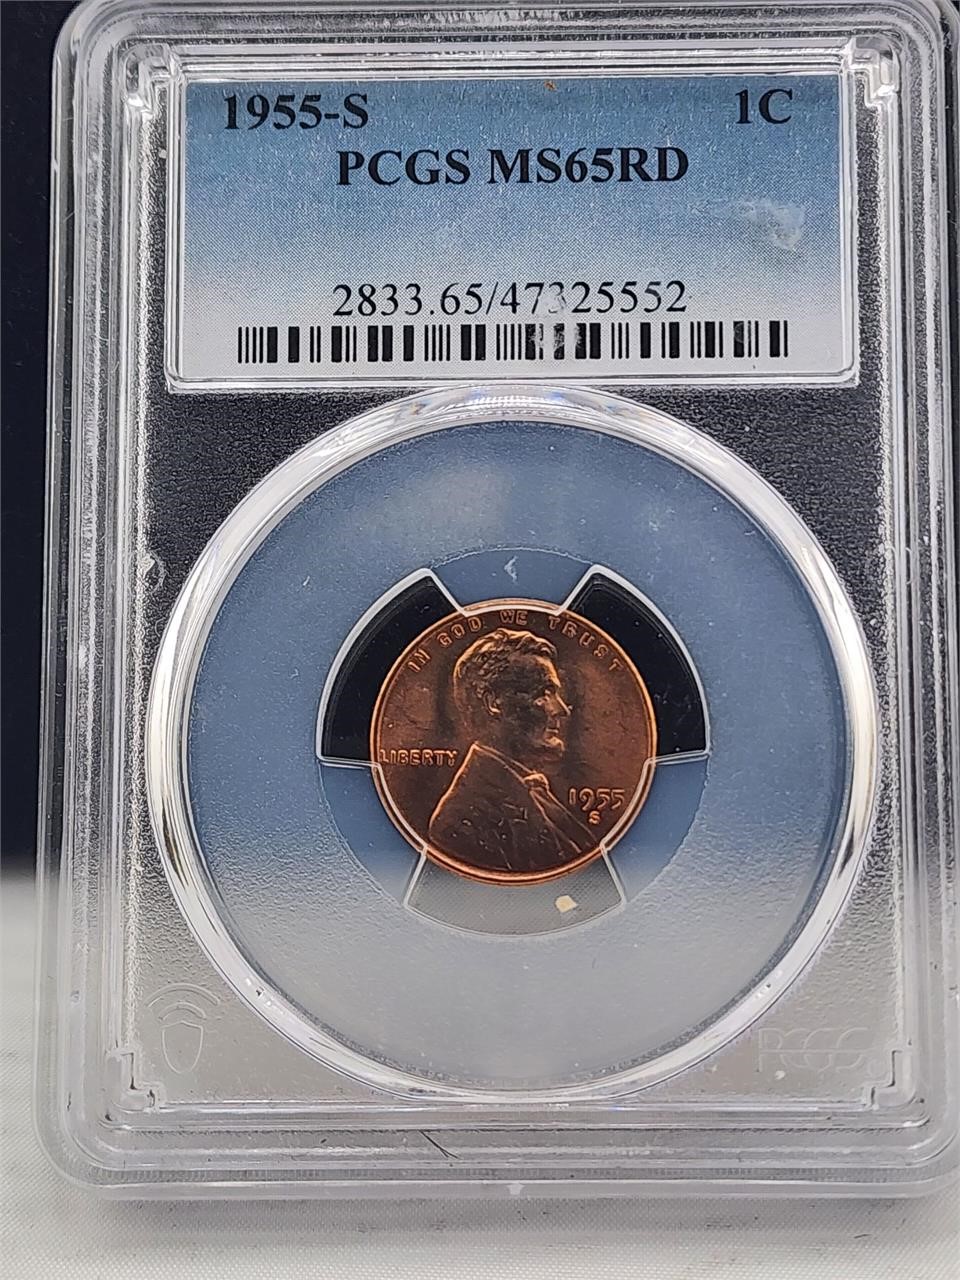 1955-S Lincoln Cent PCGS MS65RD